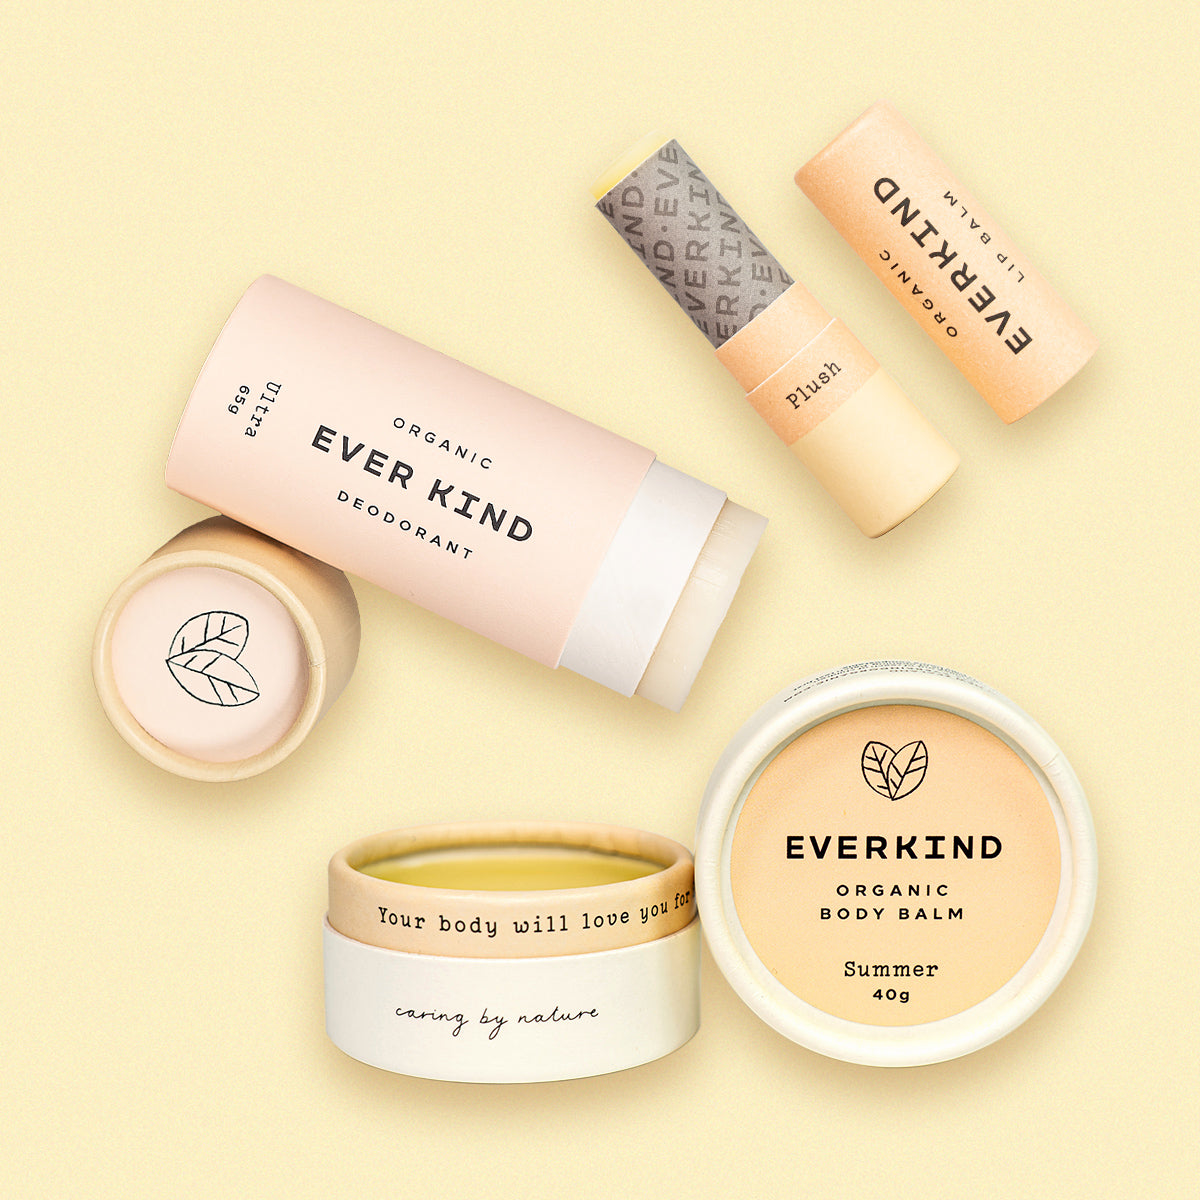 Start your day well with an Everkind Selfcare Essentials bundle. Ultra deodorant, Summer body balm, and Plush lip balm will have you simply glowing.